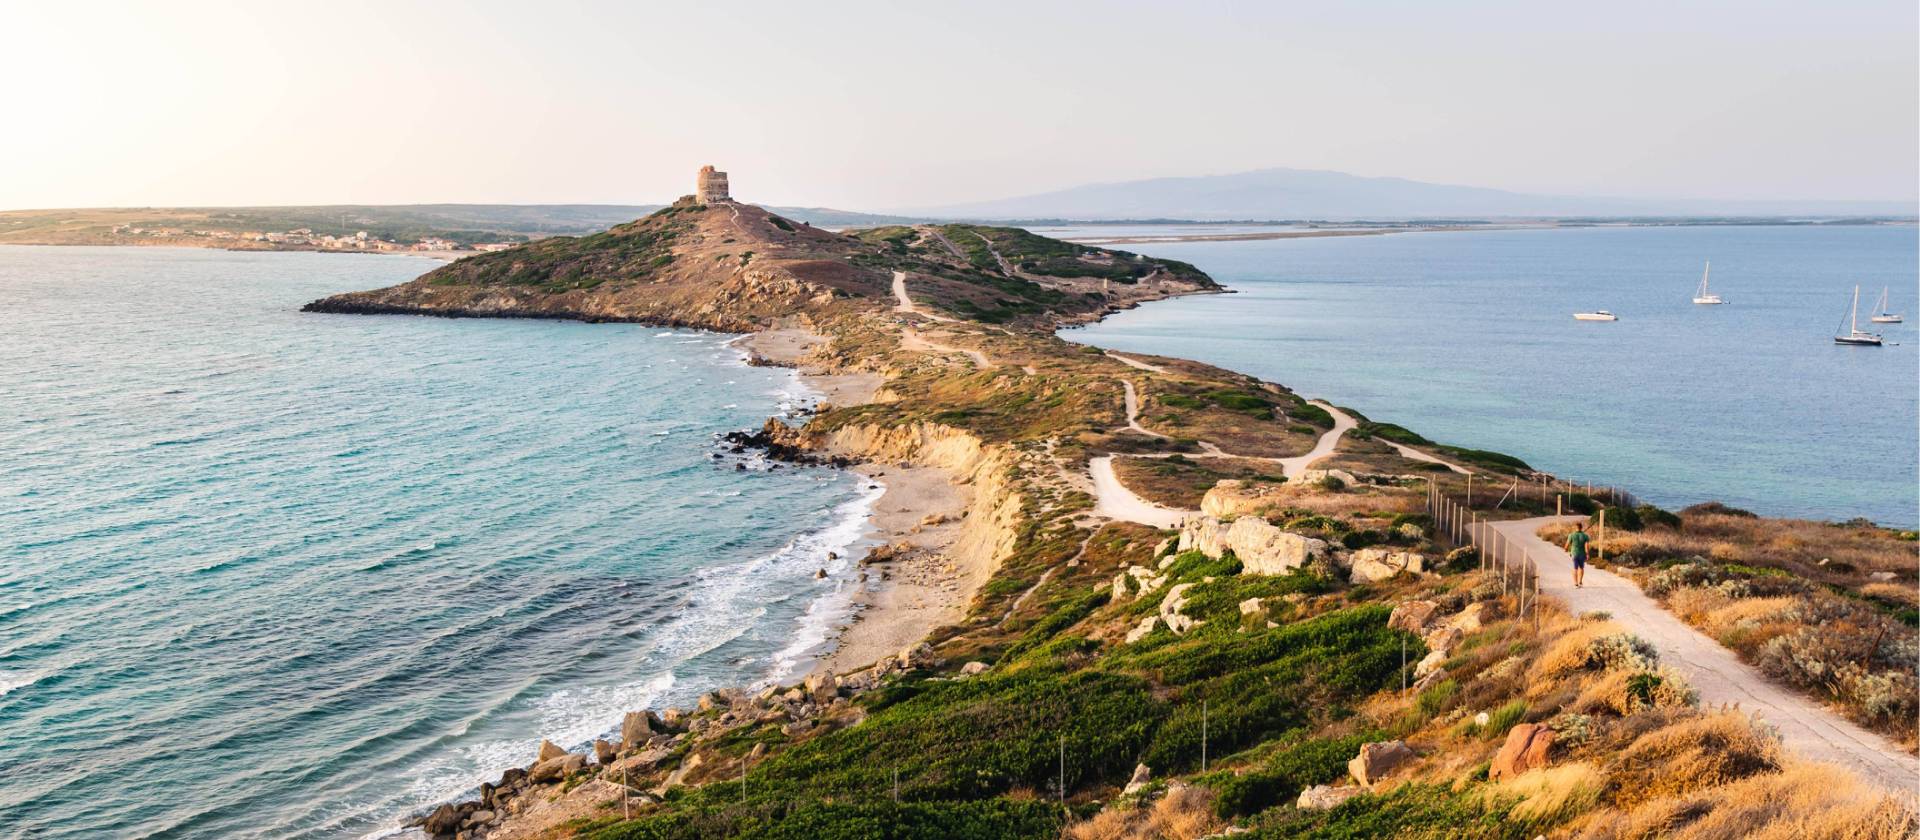 Gorgeous scenes from a walking tour in Sardinia